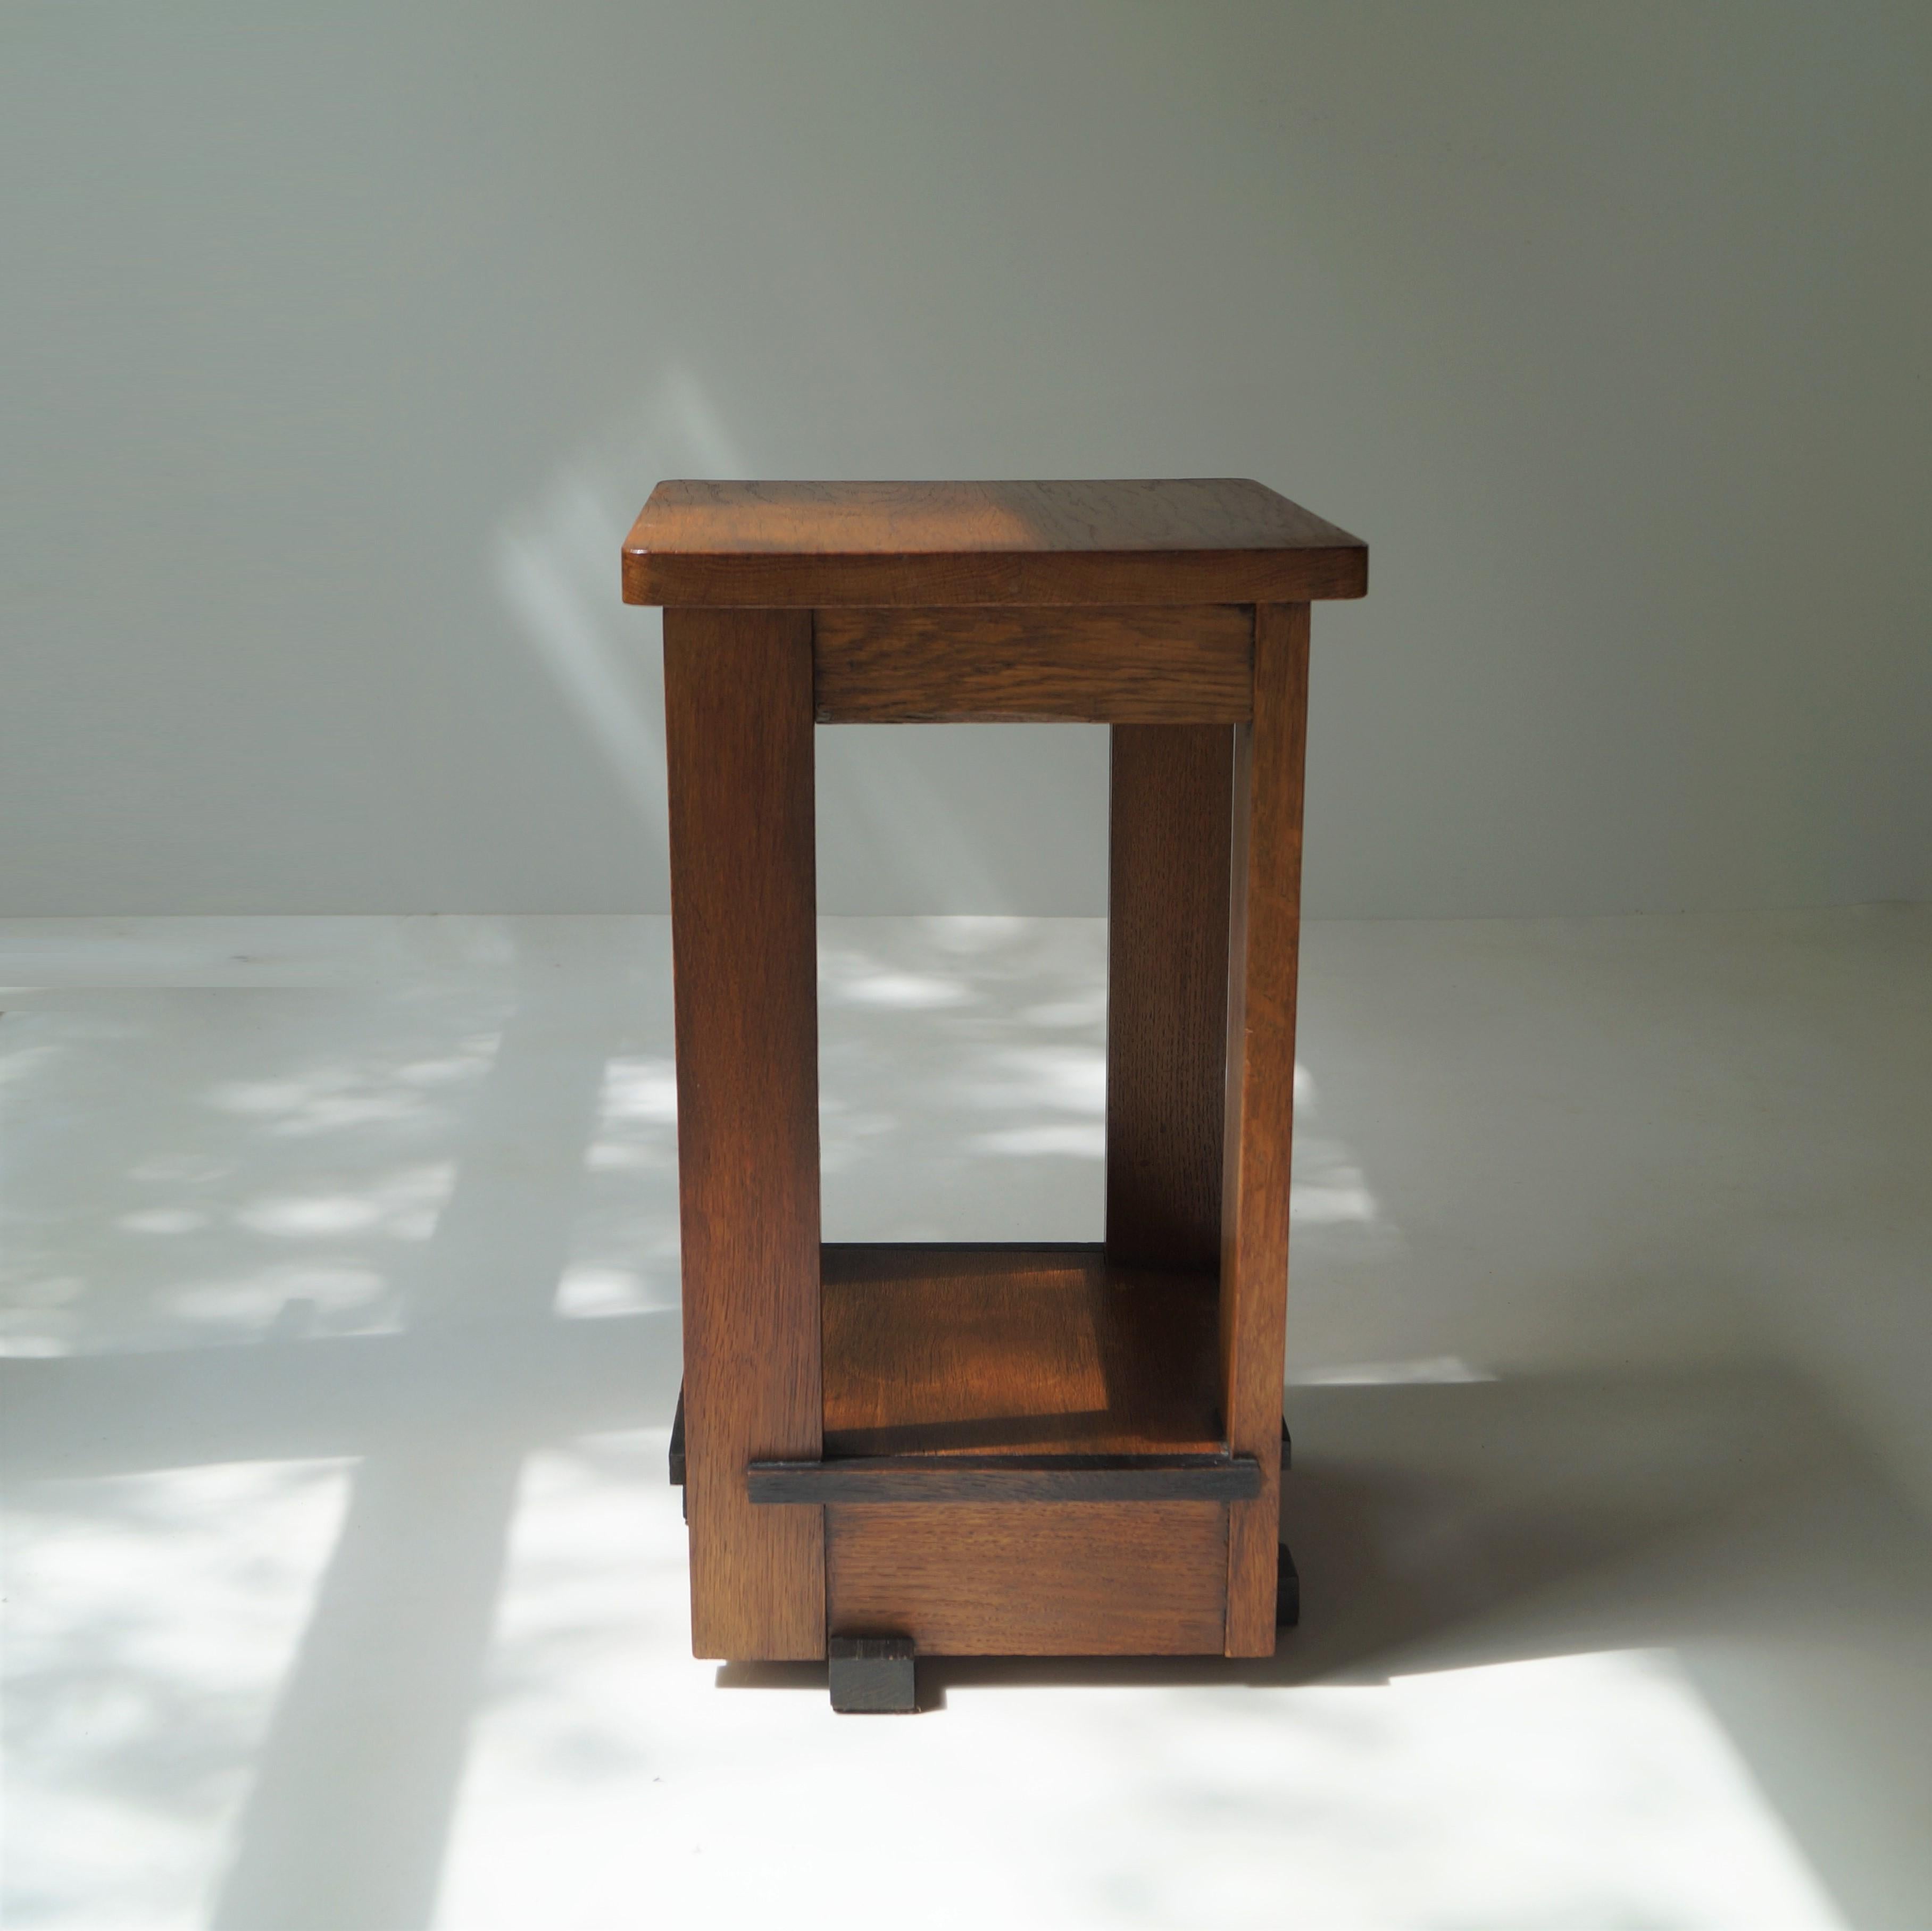 A very well made Dutch side table, typically Haagse School (The Hague School), ca. 1925. The design is very modernist. Based on similar designs and the opinion of an expert in the field, the table has been attributed to Jan Brunott